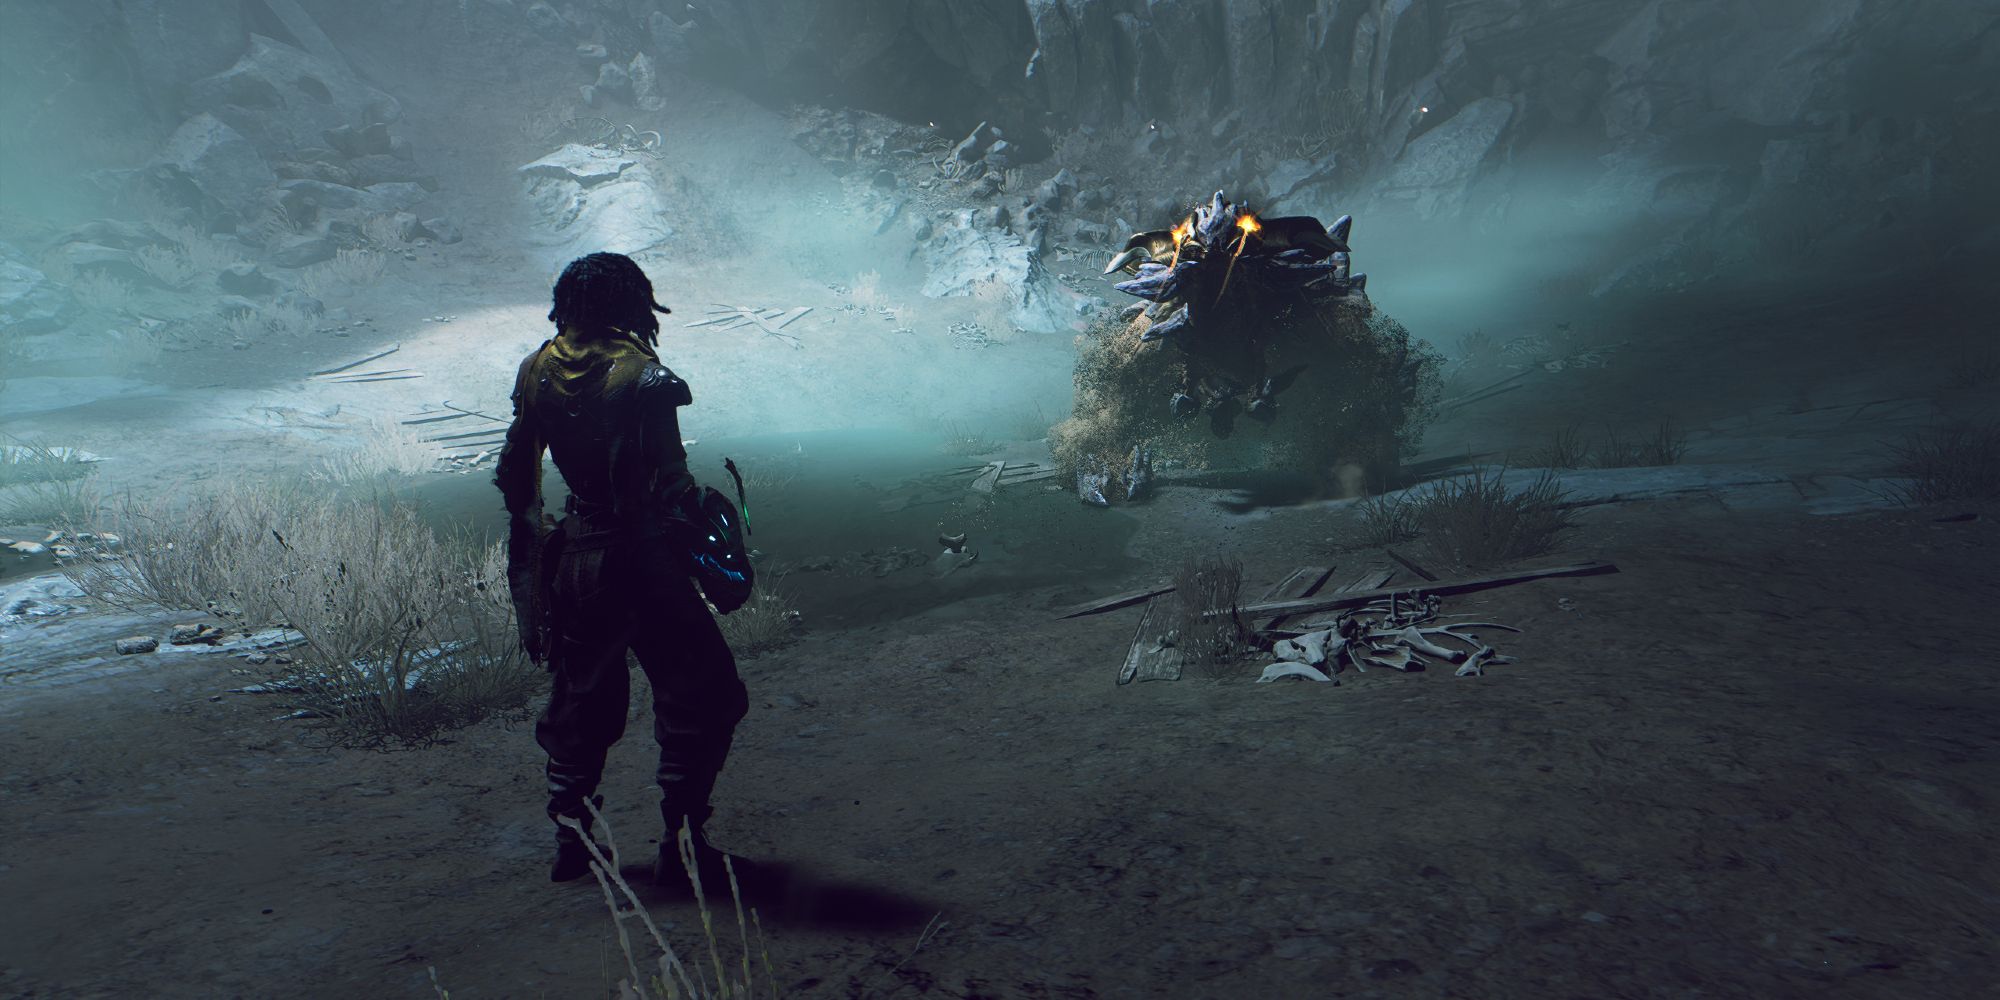 Wraith lunges at the main character in a cave, in Atlas Fallen